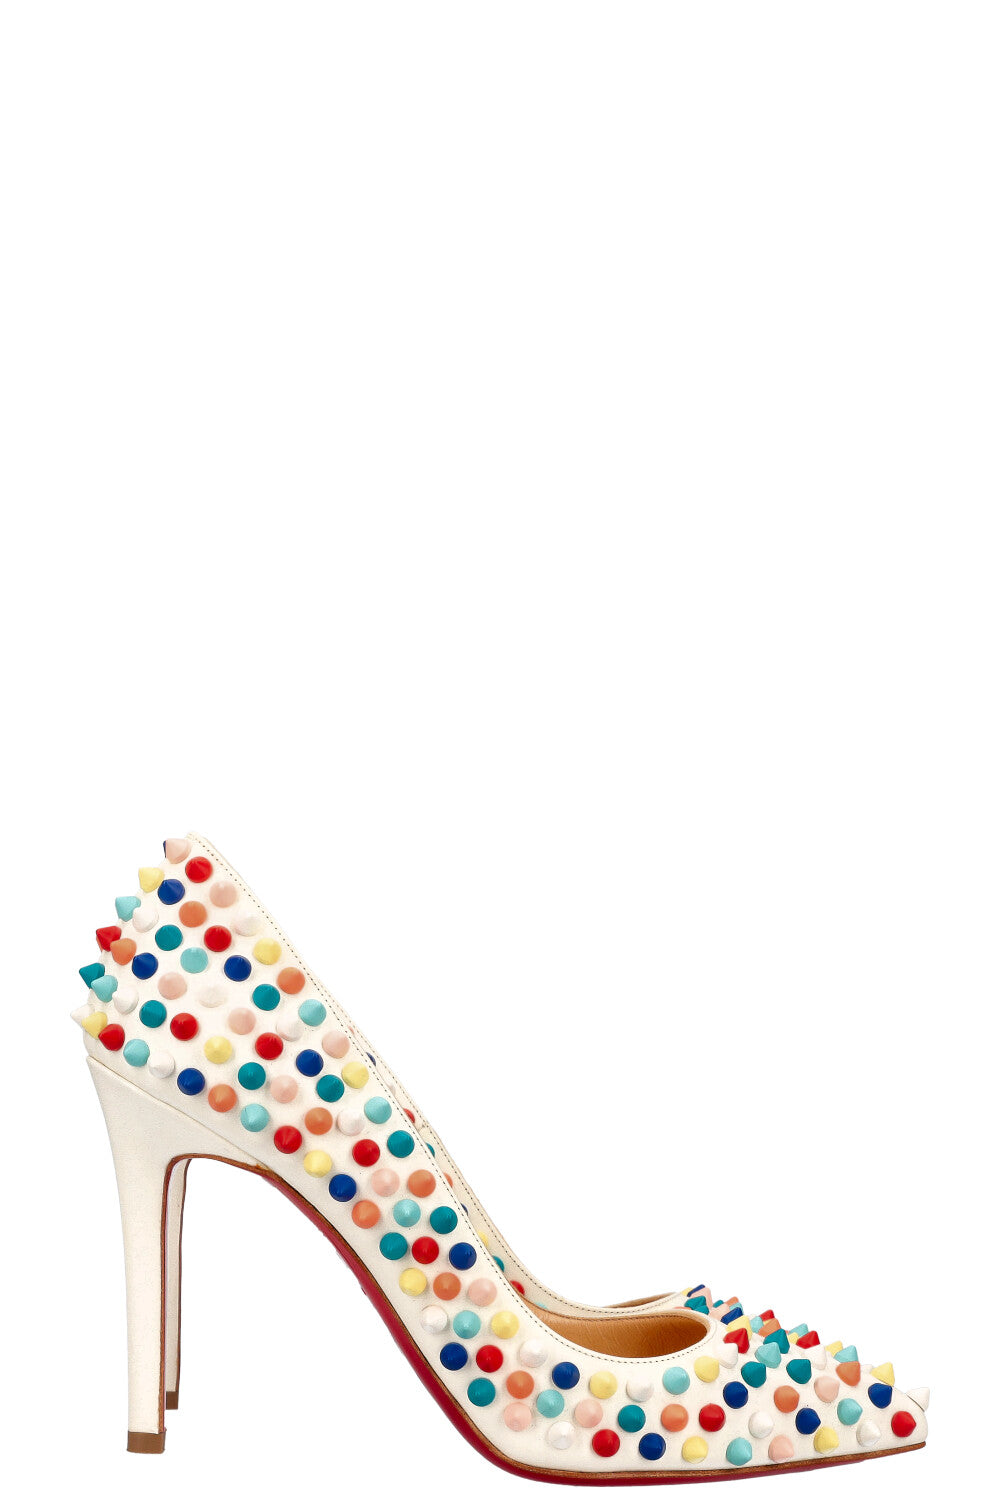 CHRISTIAN LOUBOUTIN Pointes Pigalle Multicolore